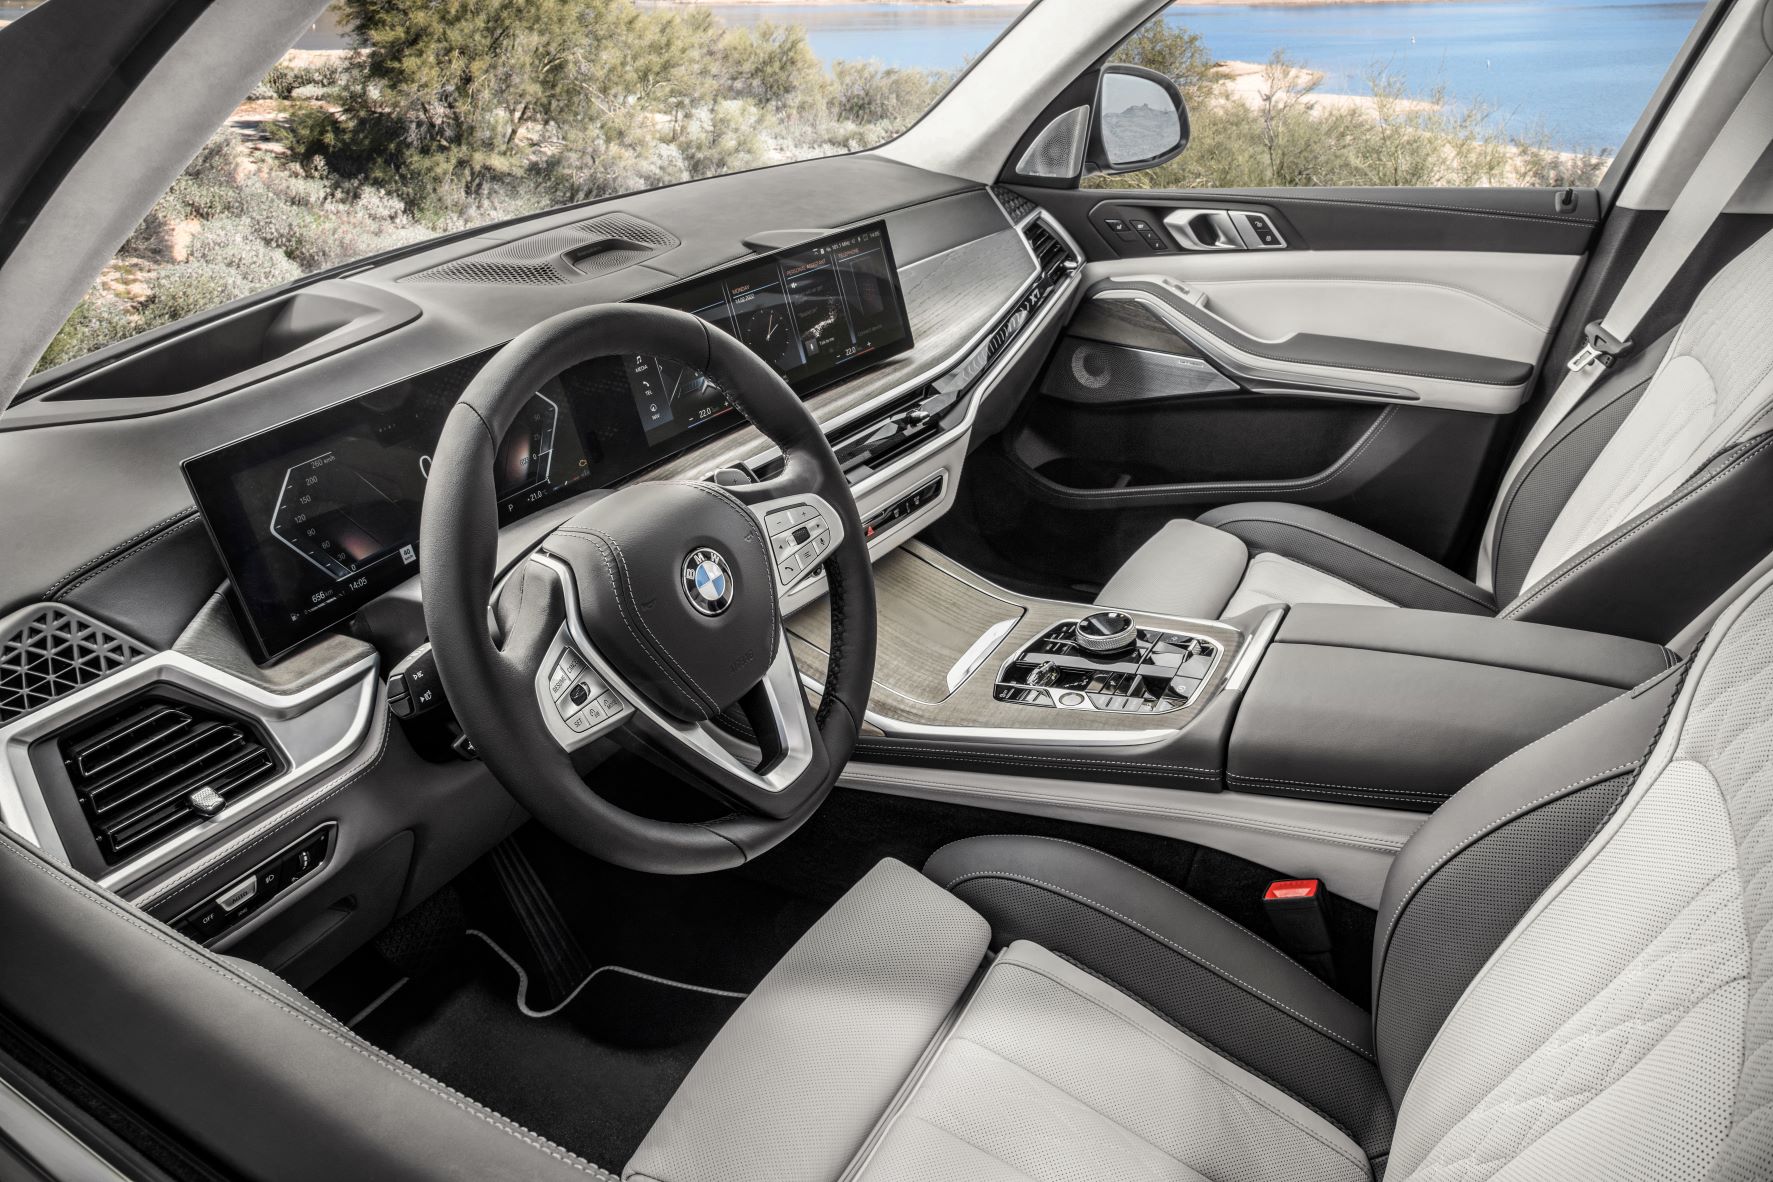 Interior of the new BMW X7